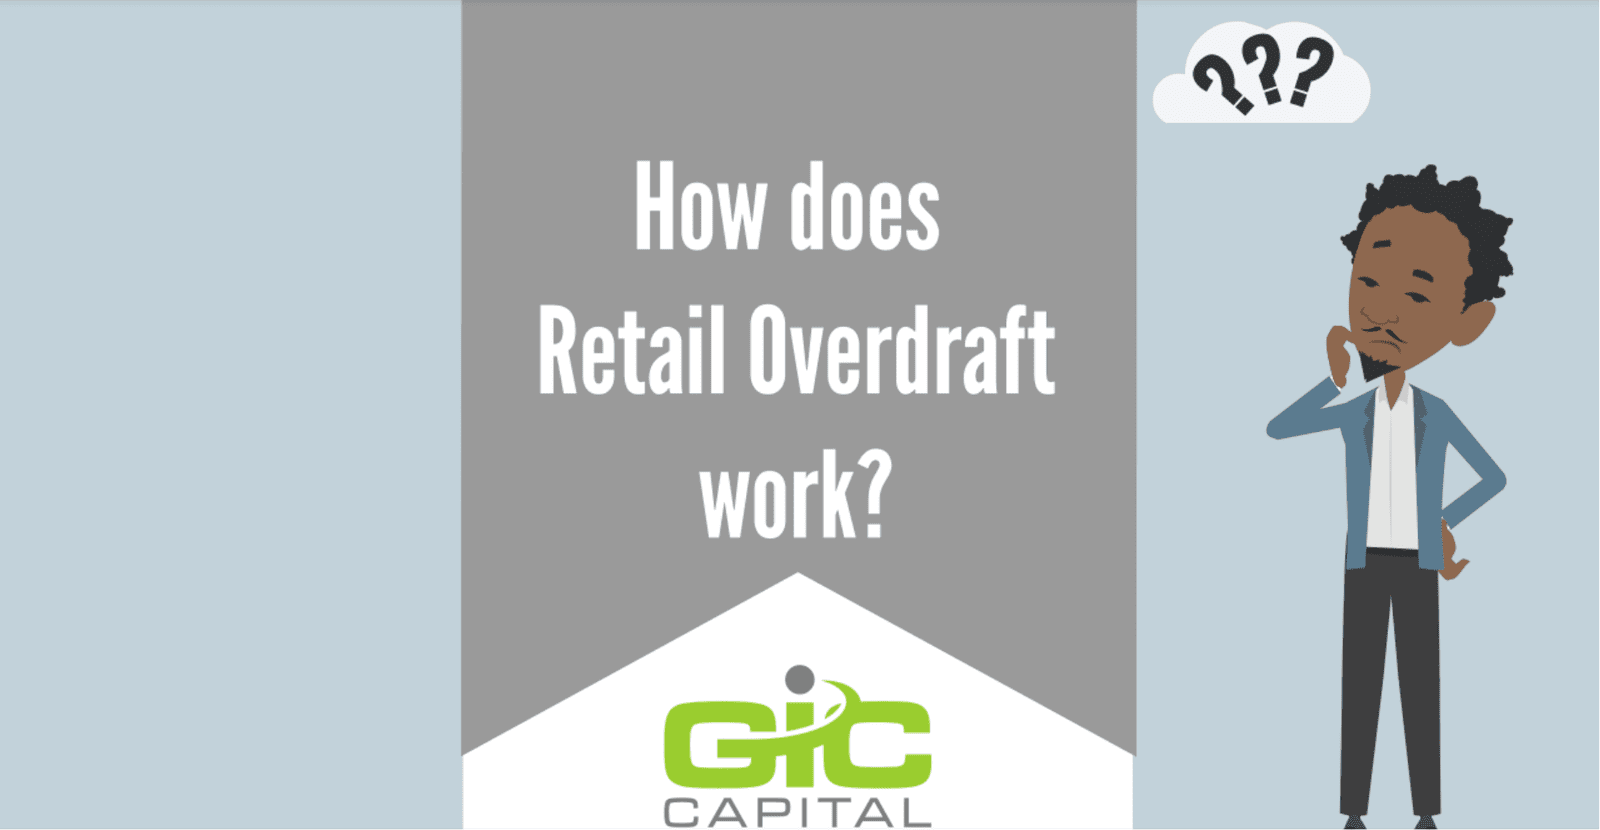 How does Retail Overdraft work?